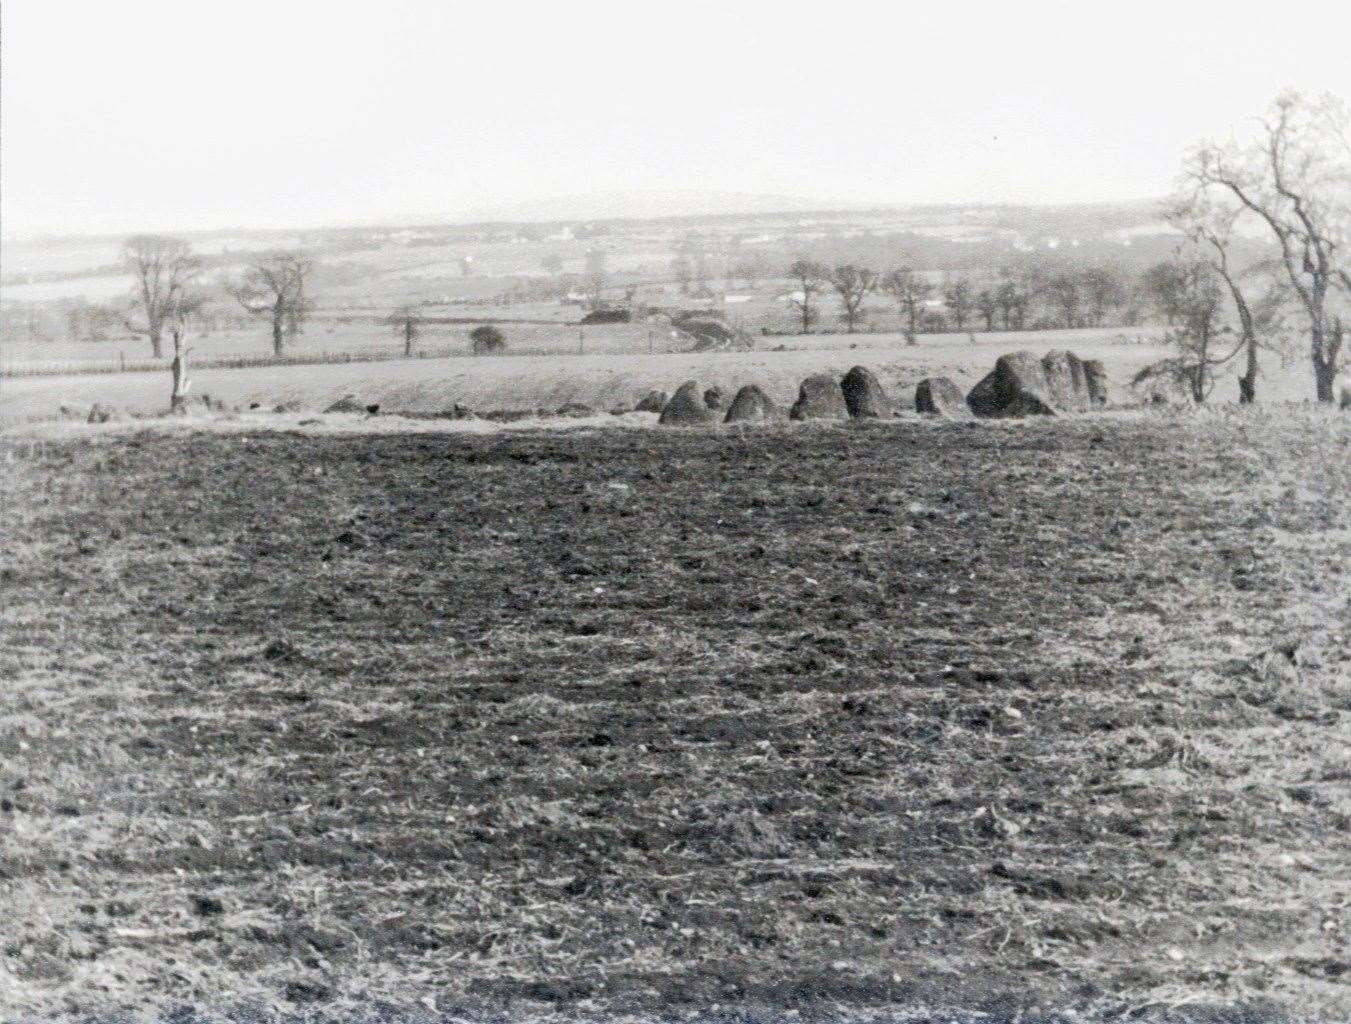 A photograph of Raigmore Stone Circle, c.1960 Edward Meldrum, courtesy of Inverness Library.